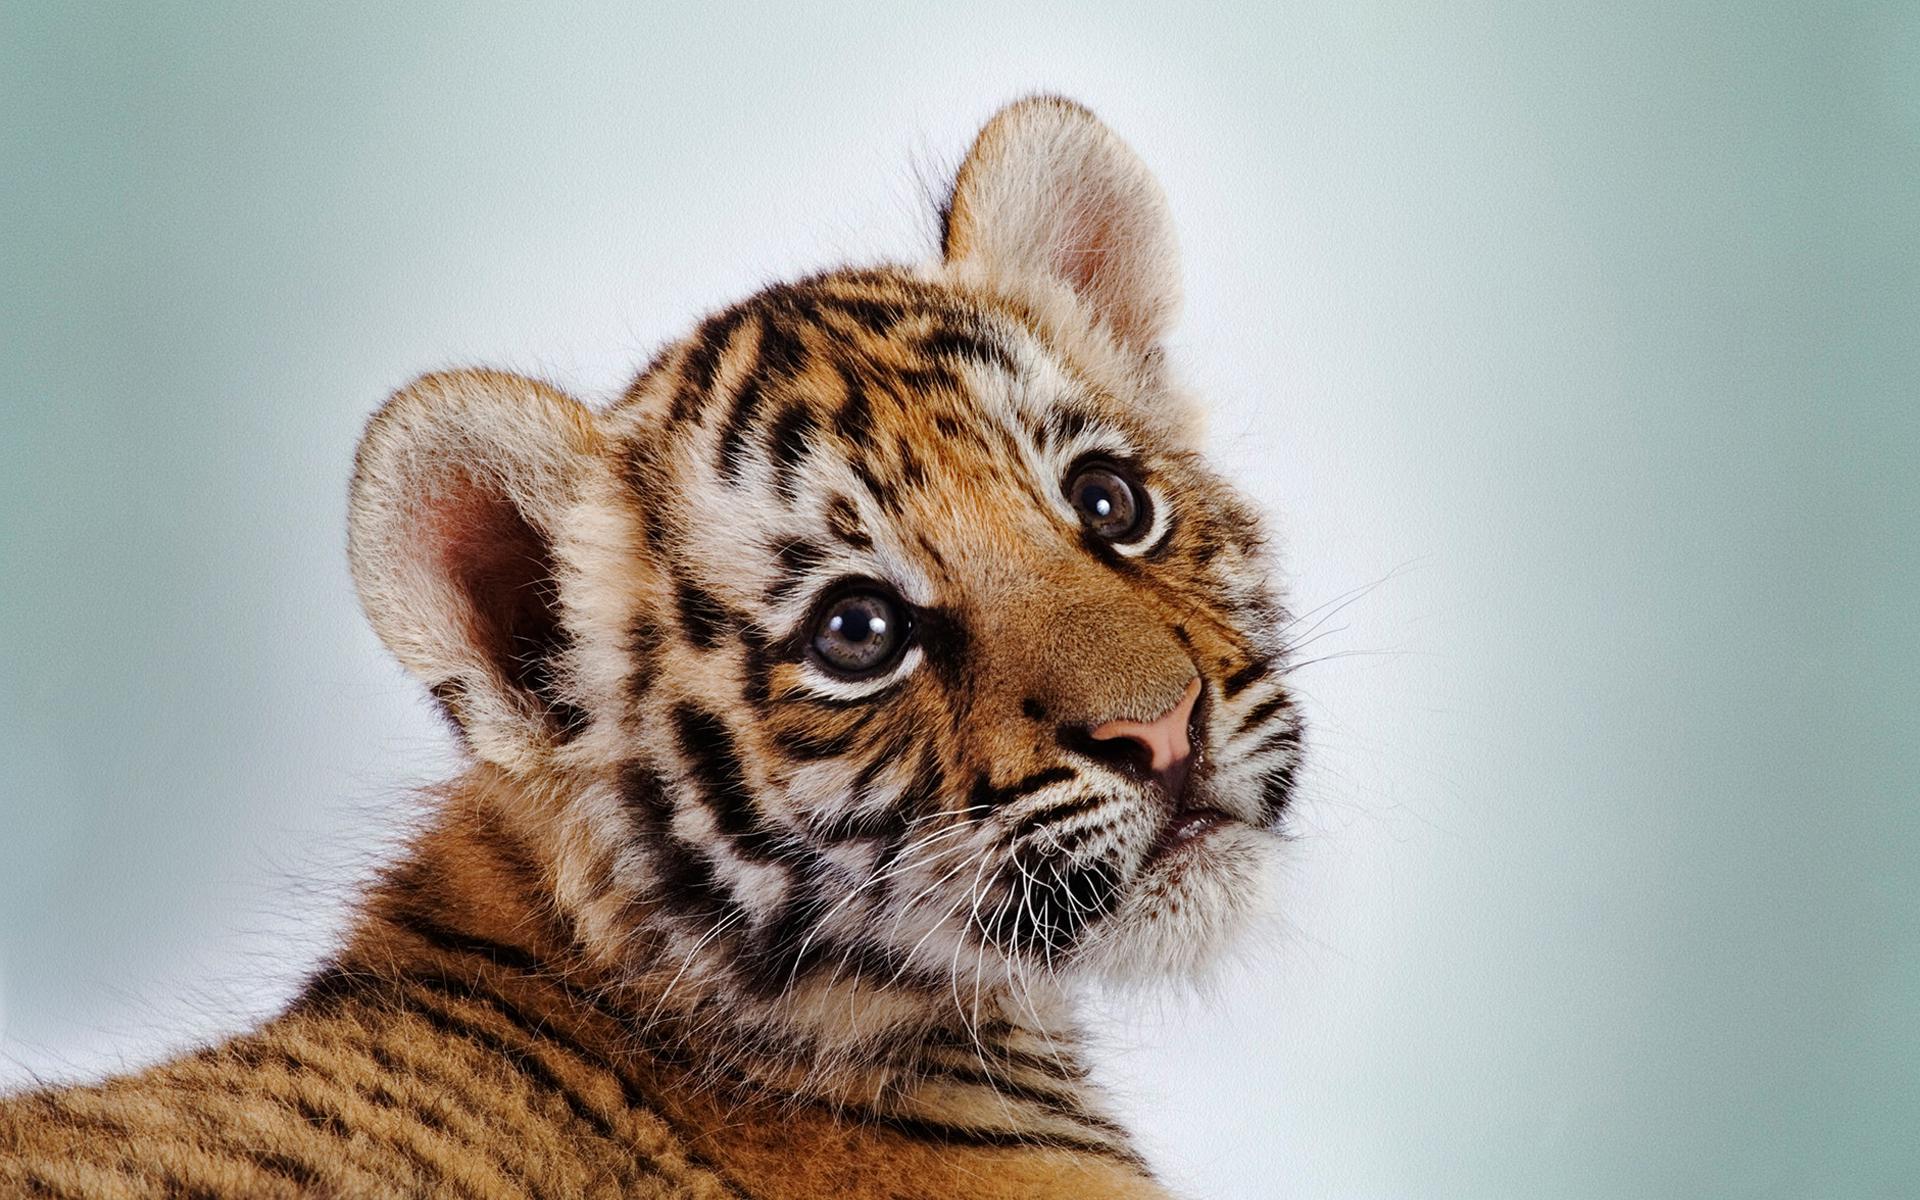 cute baby tiger wallpapers